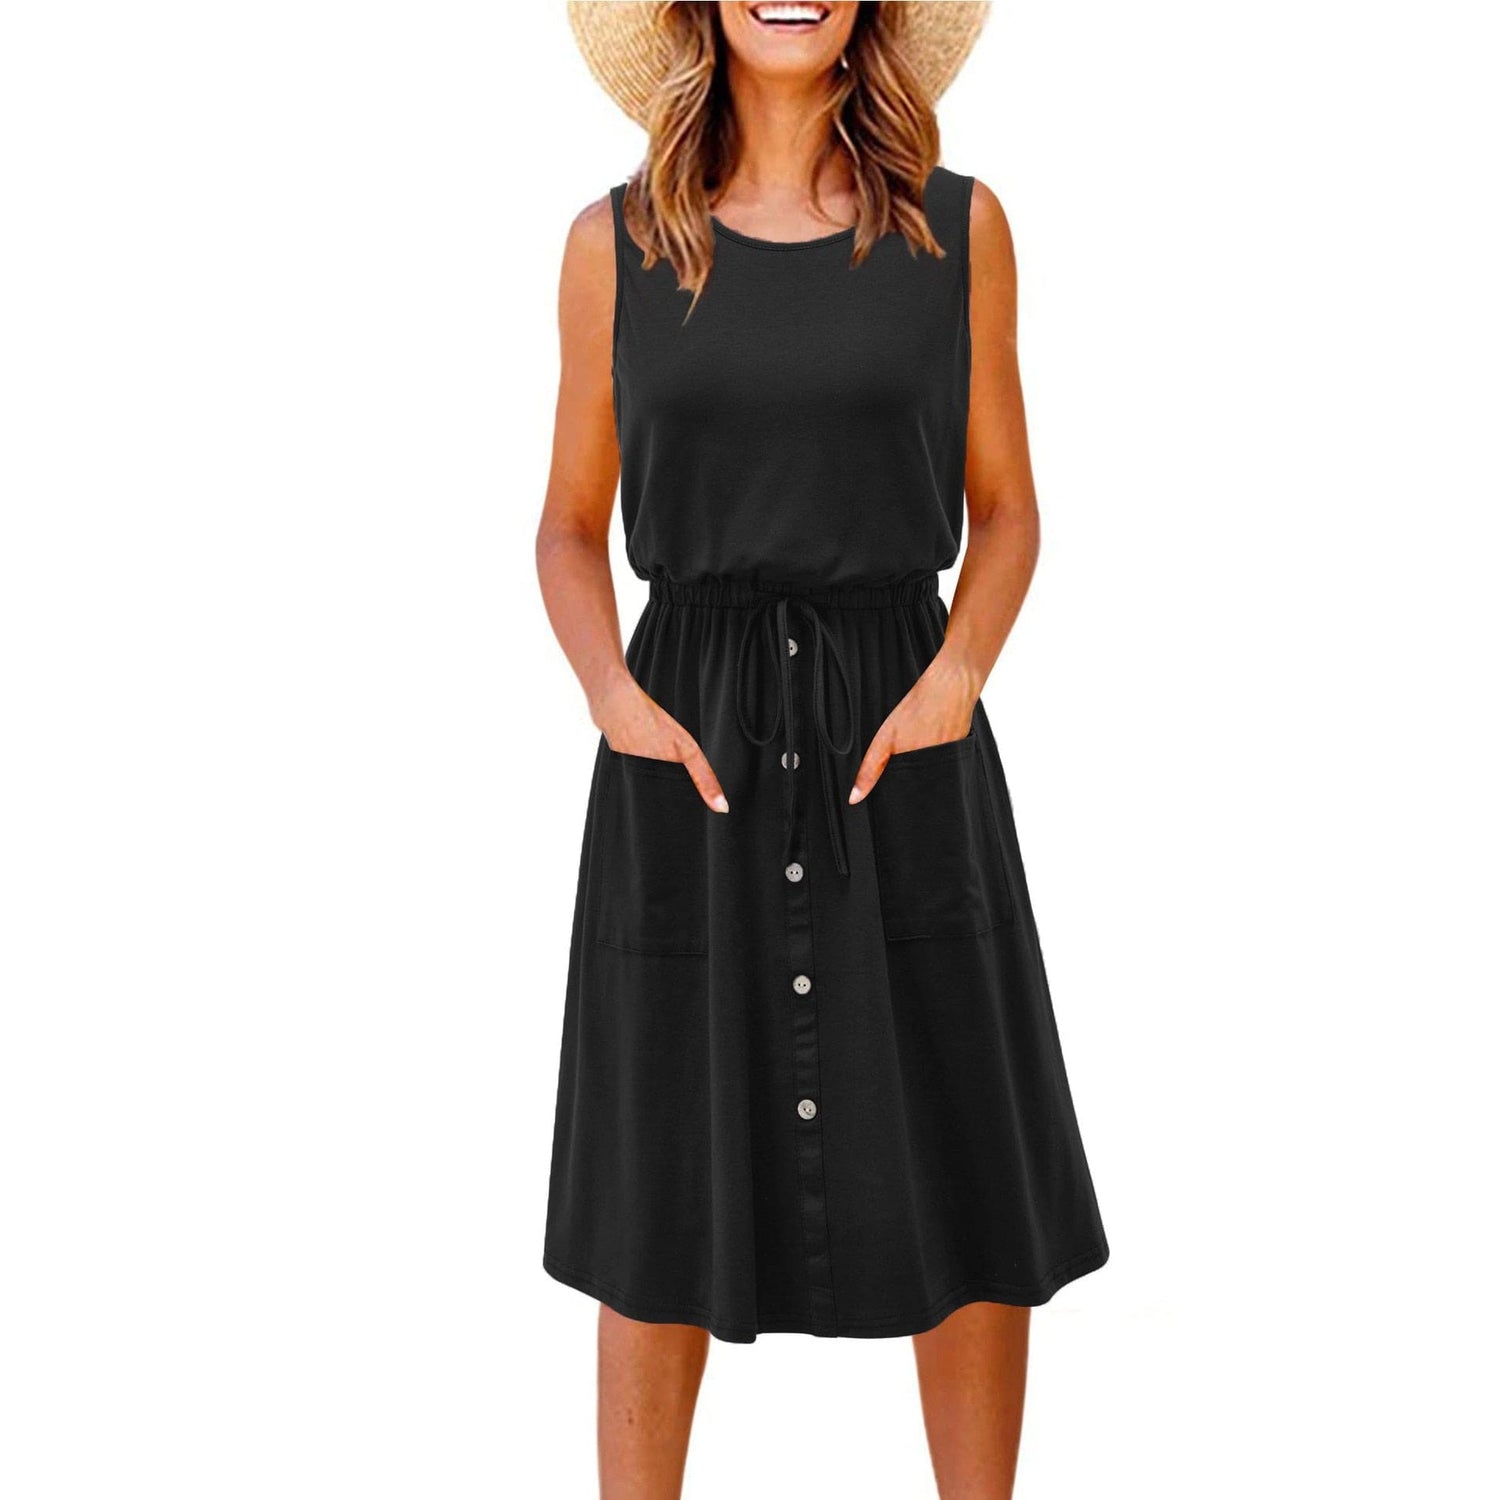 Buddha Trends Dress Black / S Xinaa Lace-up Mid Dress With Pockets